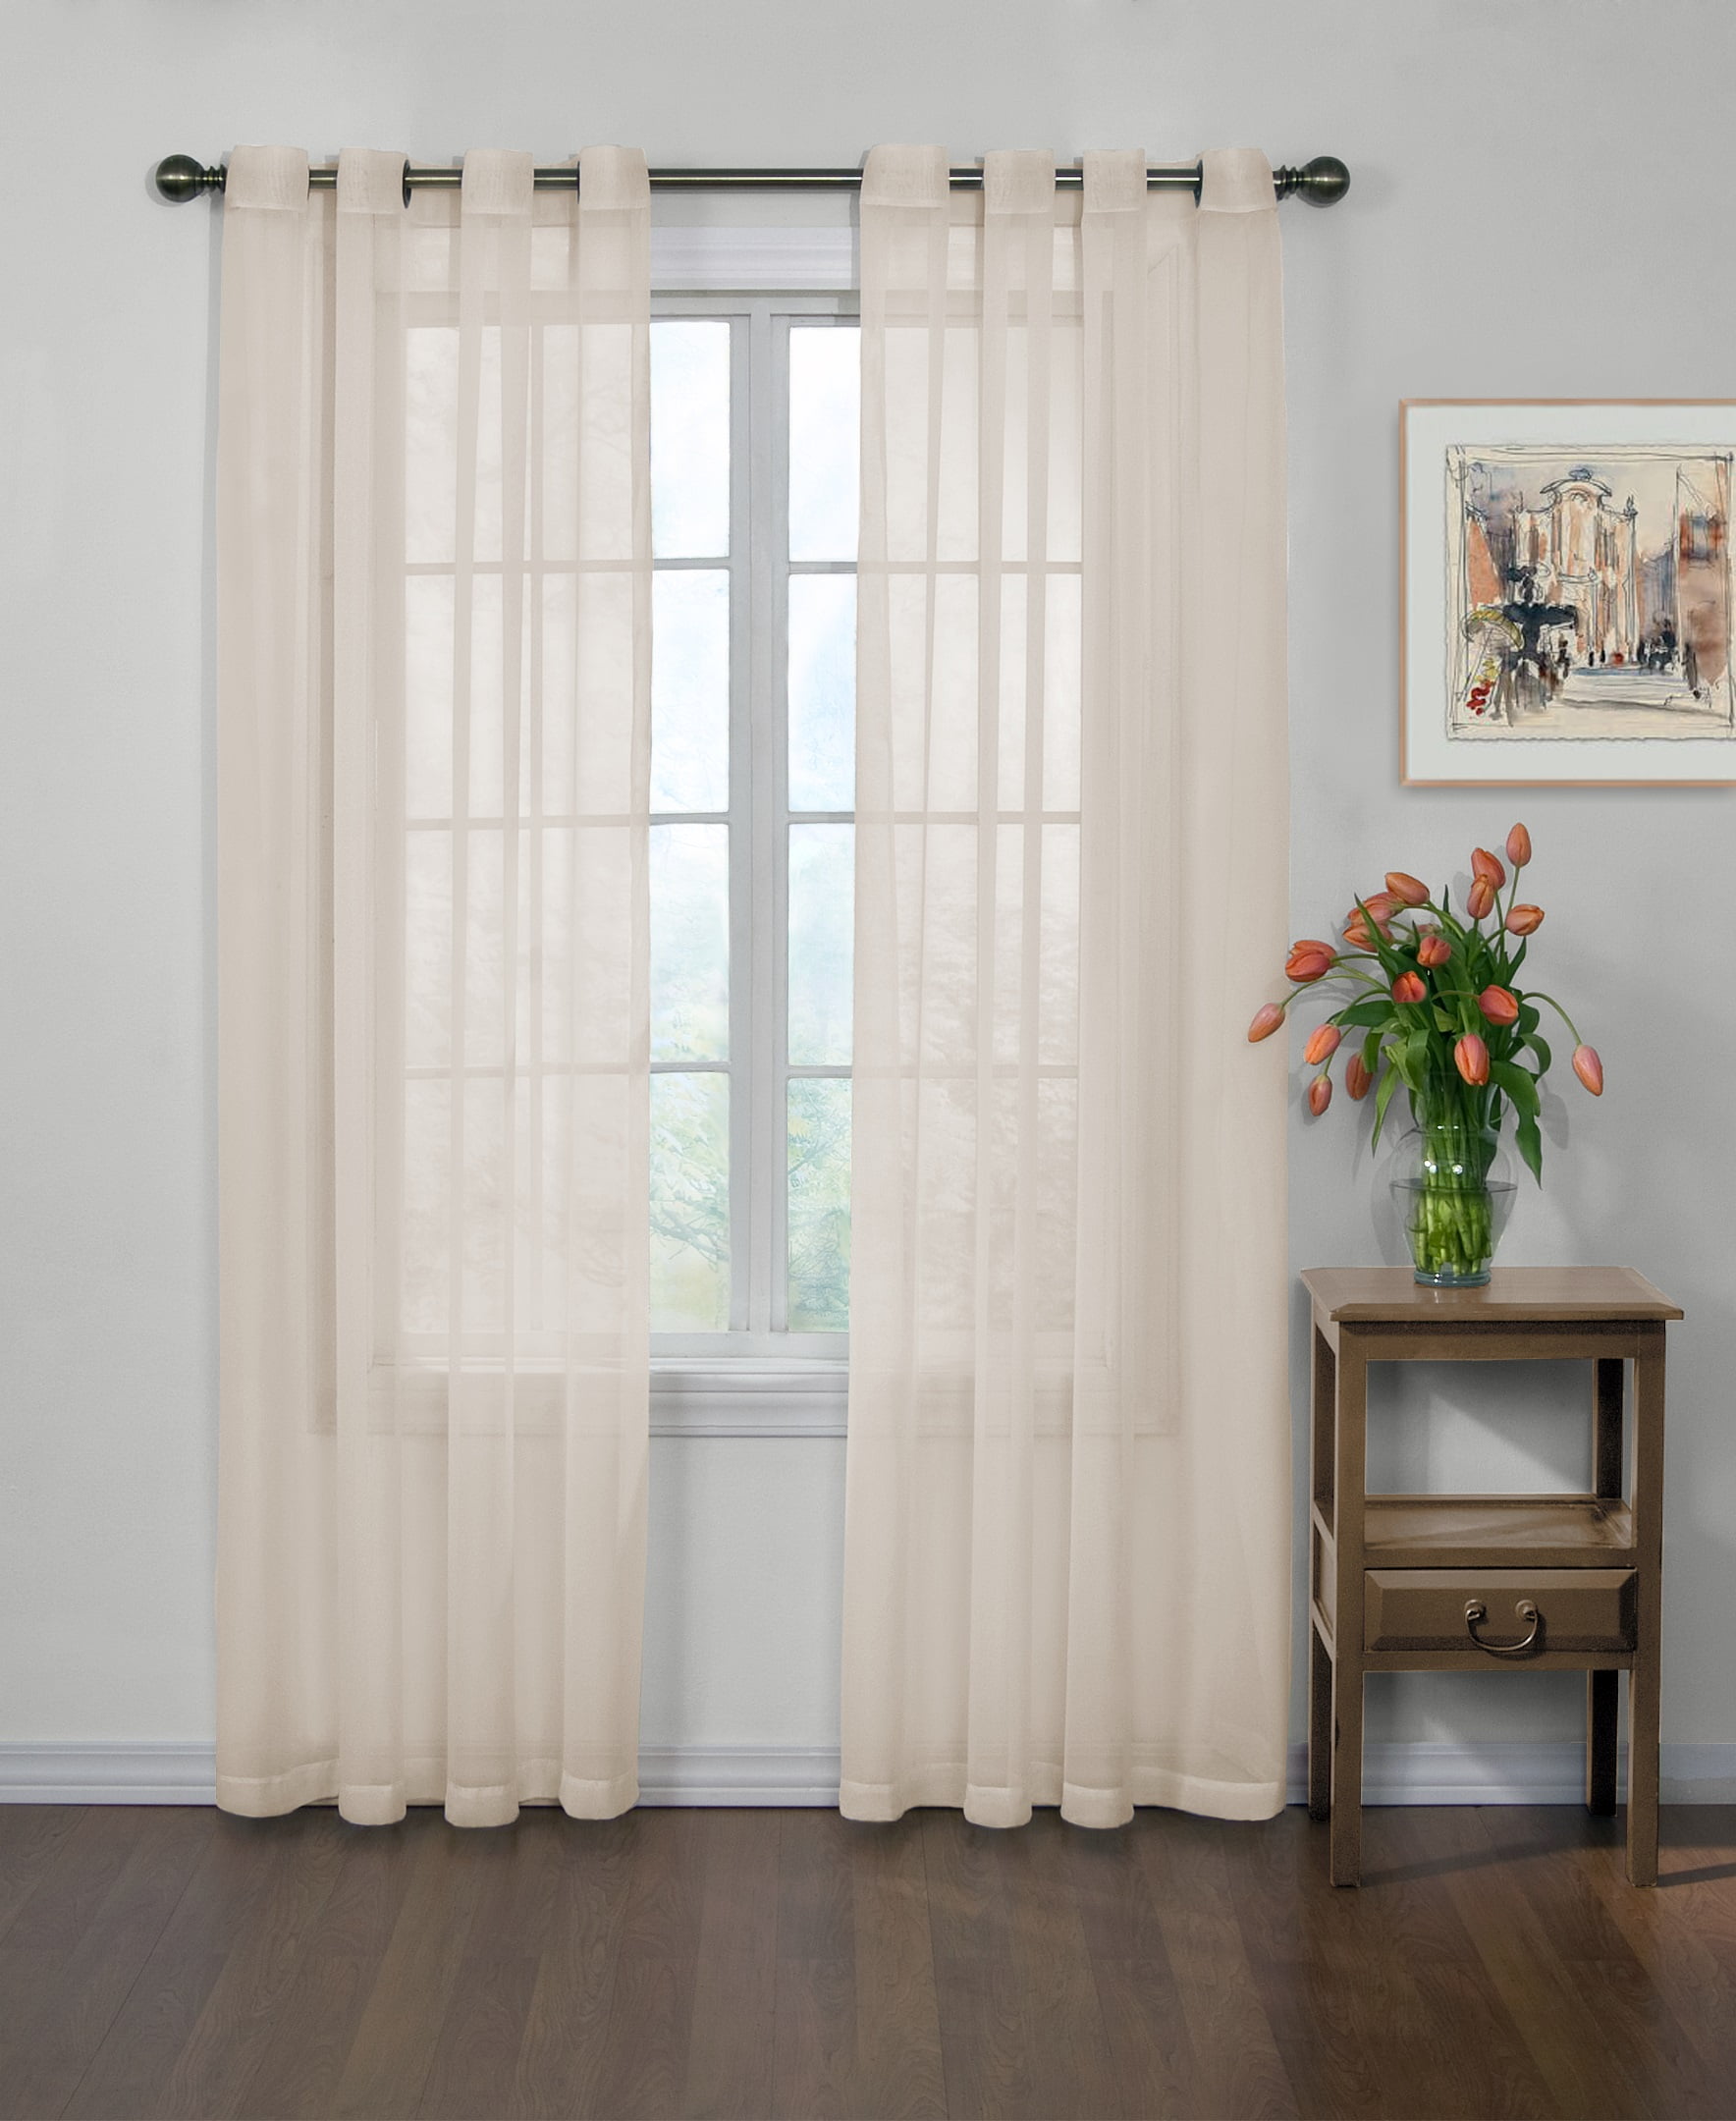 63" long Better Homes & Gardens Crushed Voile Sheer Curtain Two Clay Beige 2 